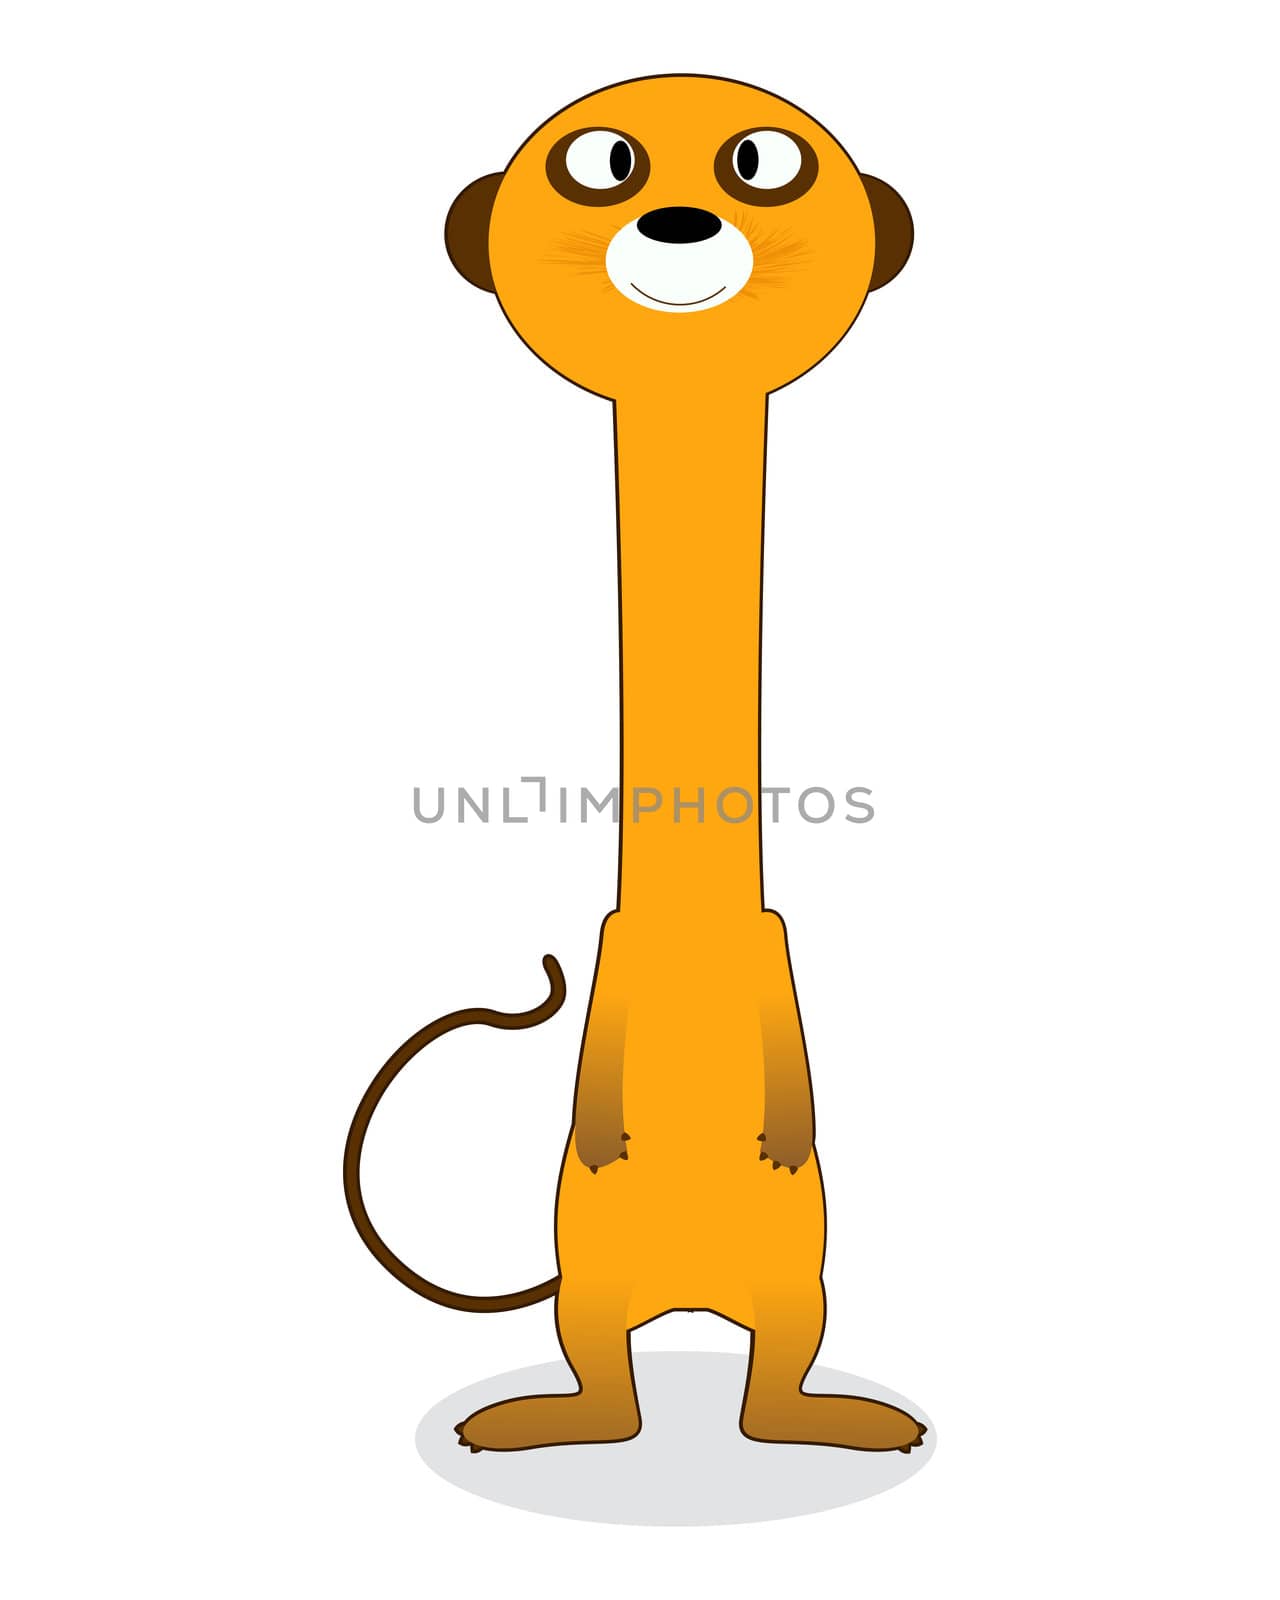 Clip art meerkat, isolated object over white background